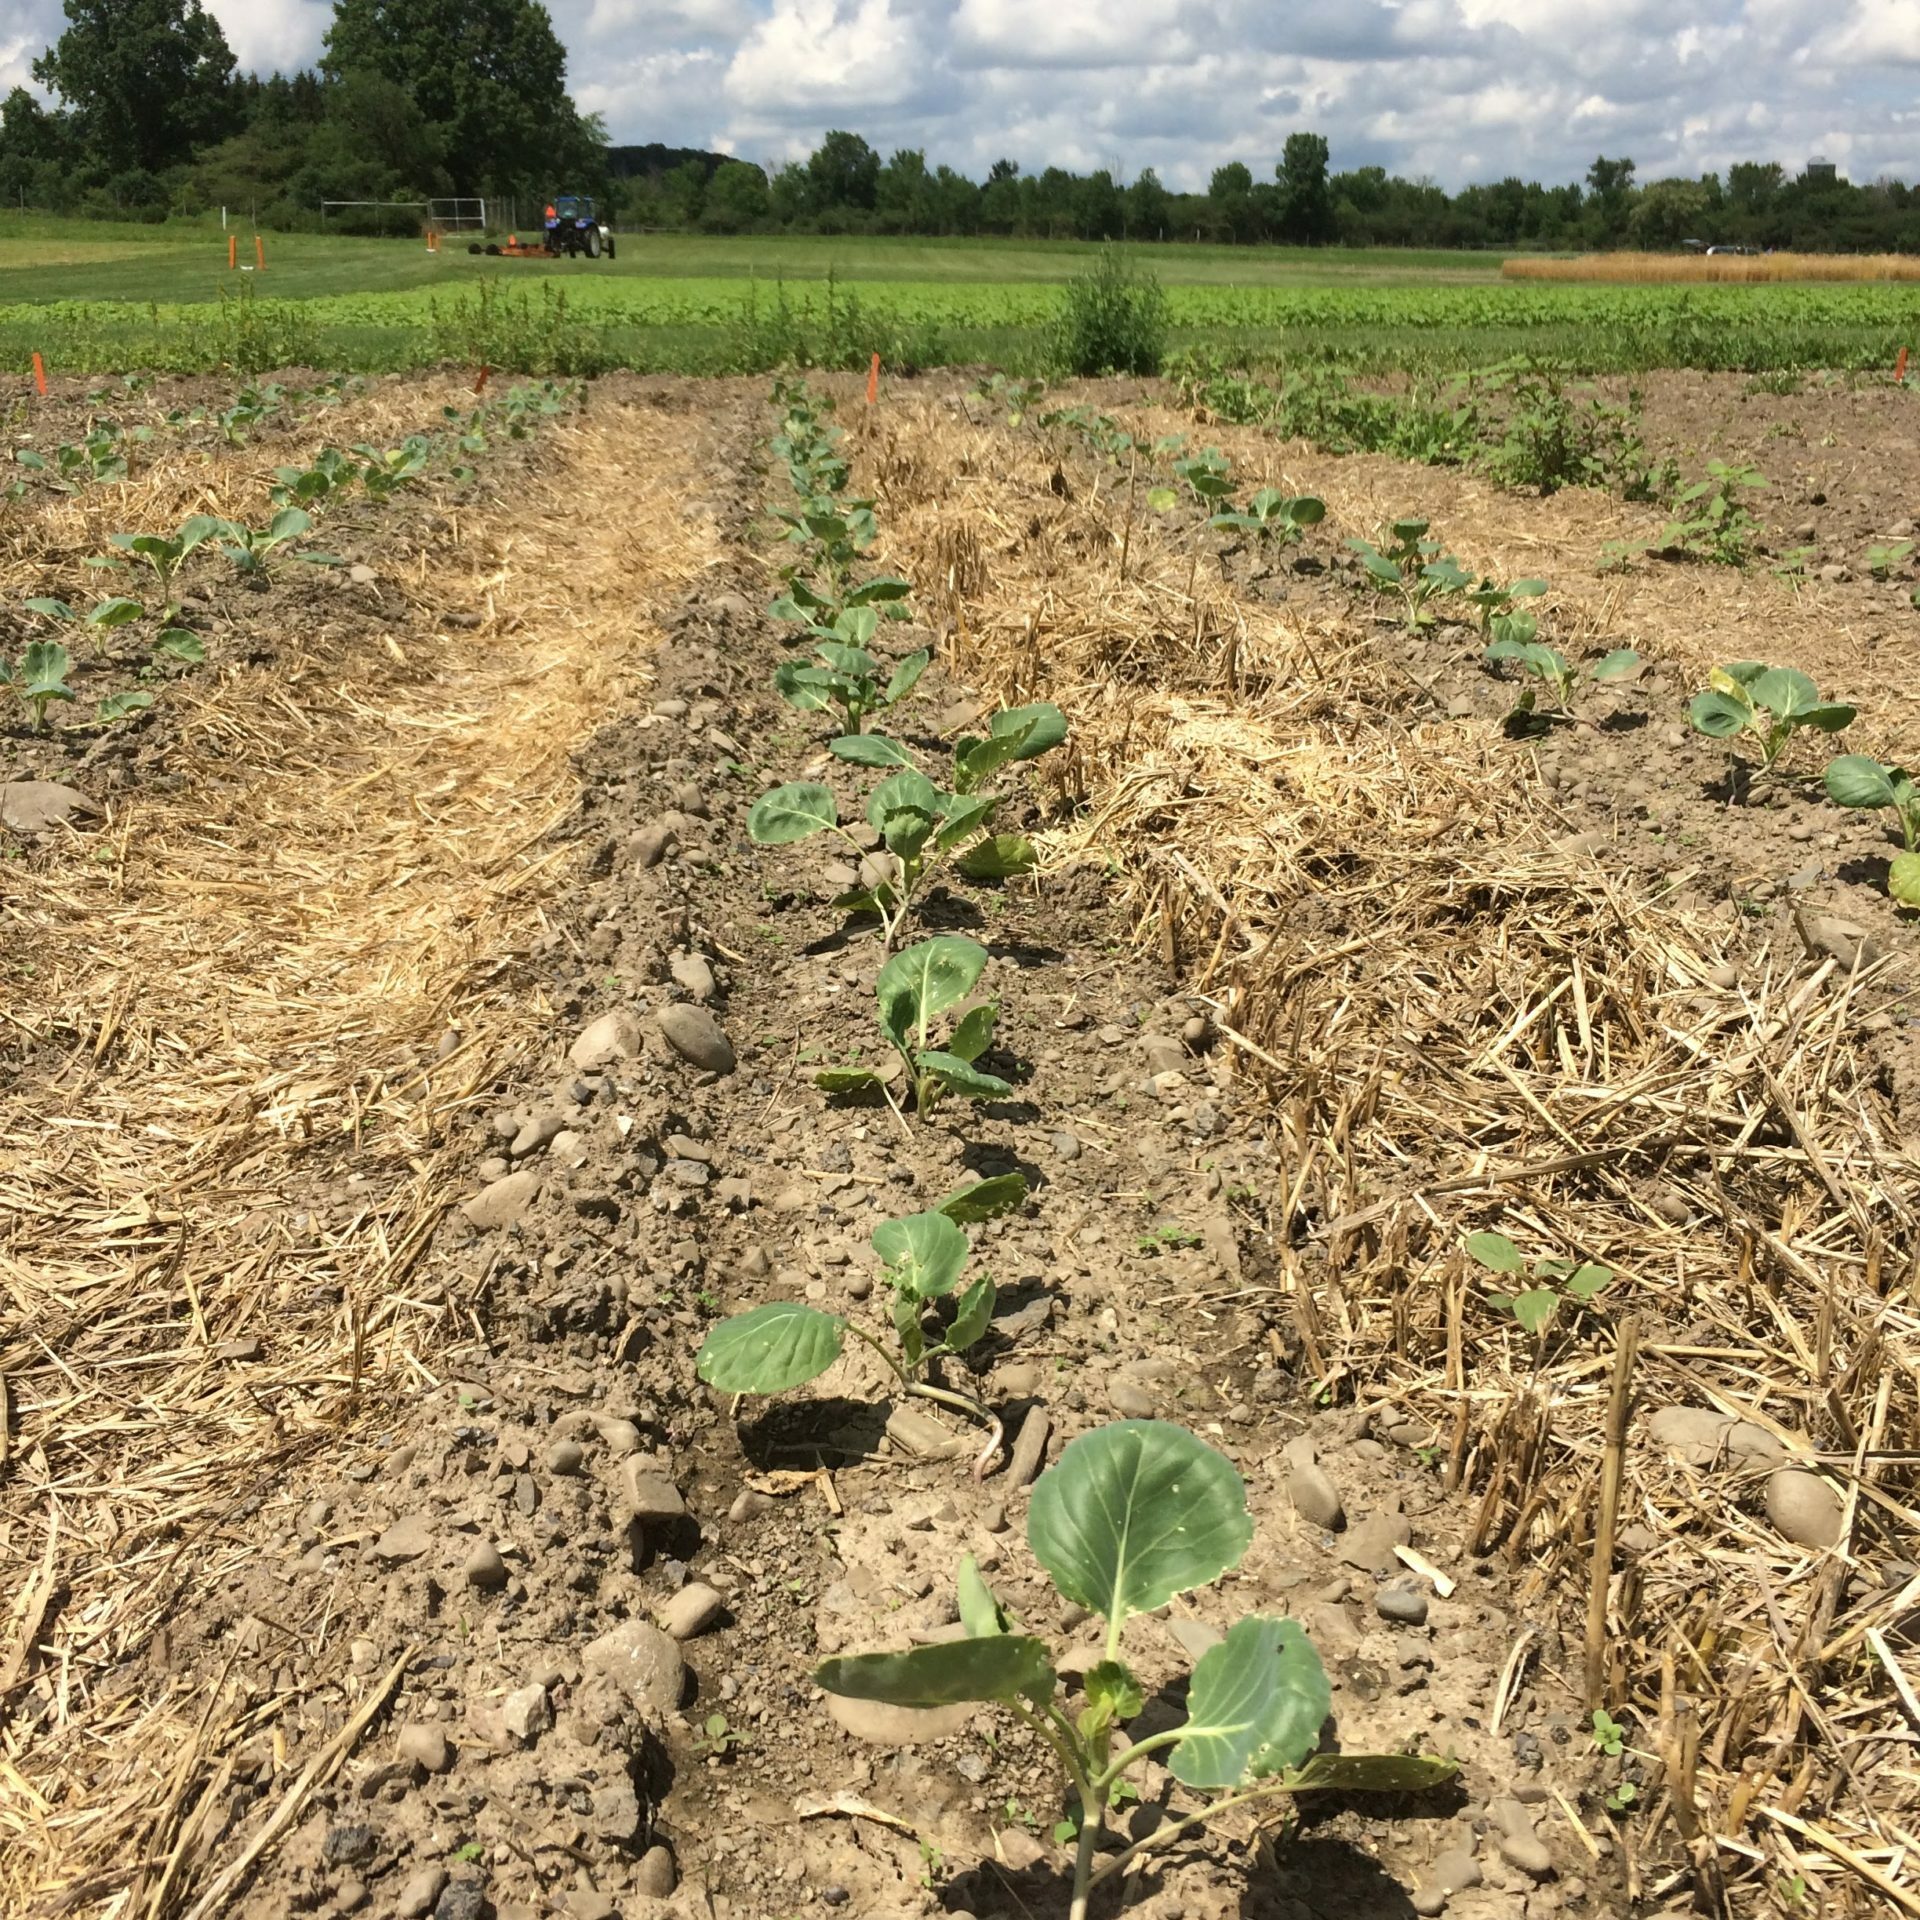 Fall brassicas are one crop that works for planting after maximizing cereal-legume cover crop biomass in spring.